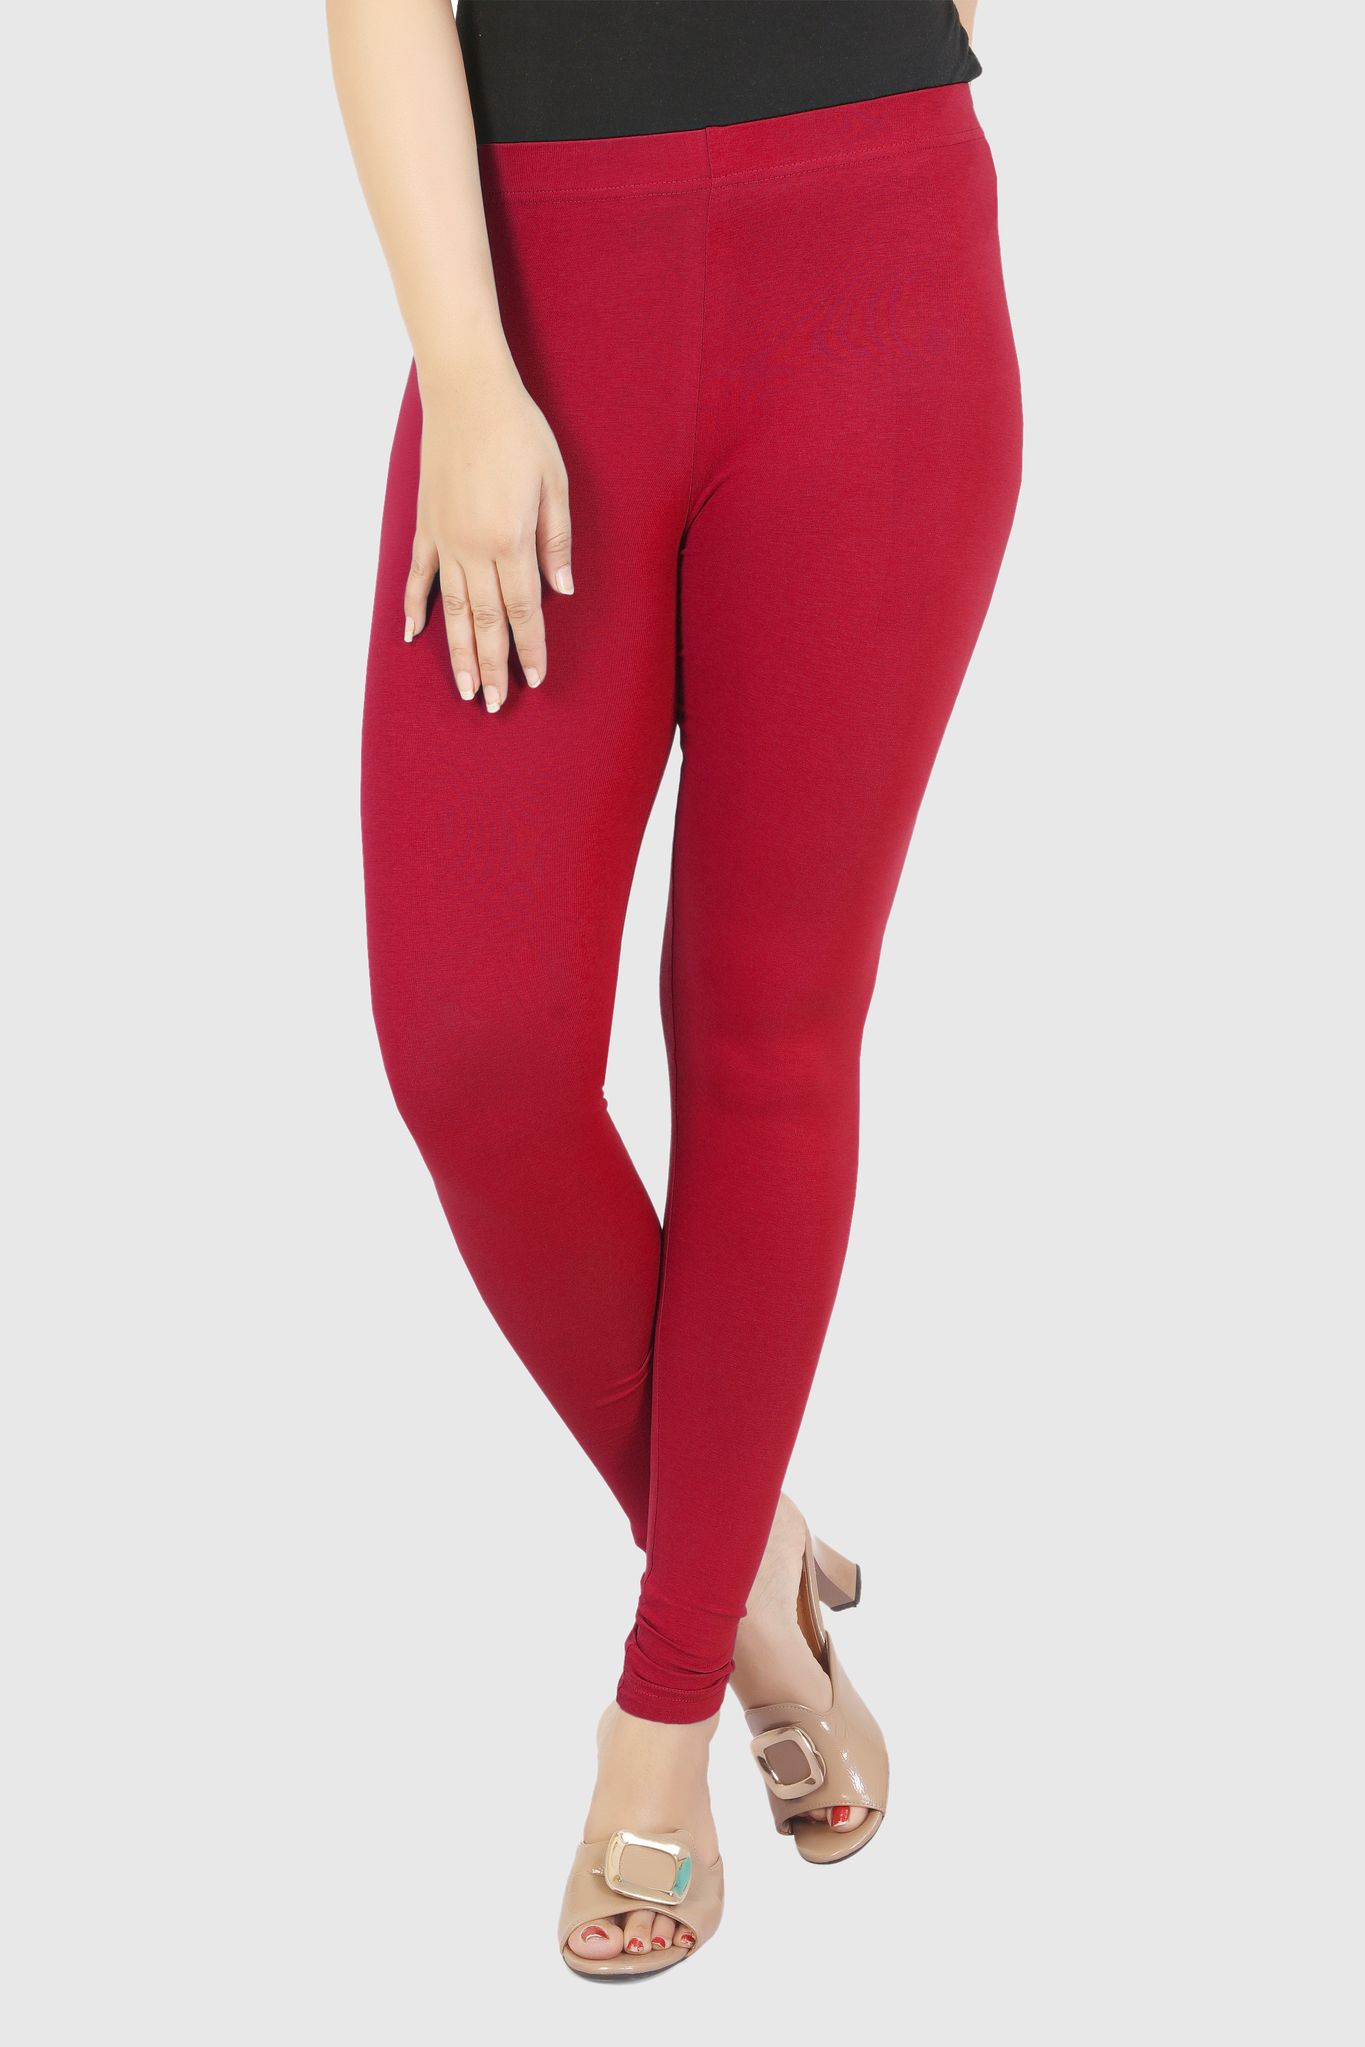 Cotton Casual Wear Ladies Ankle Length Leggings at Rs 140 in Surat